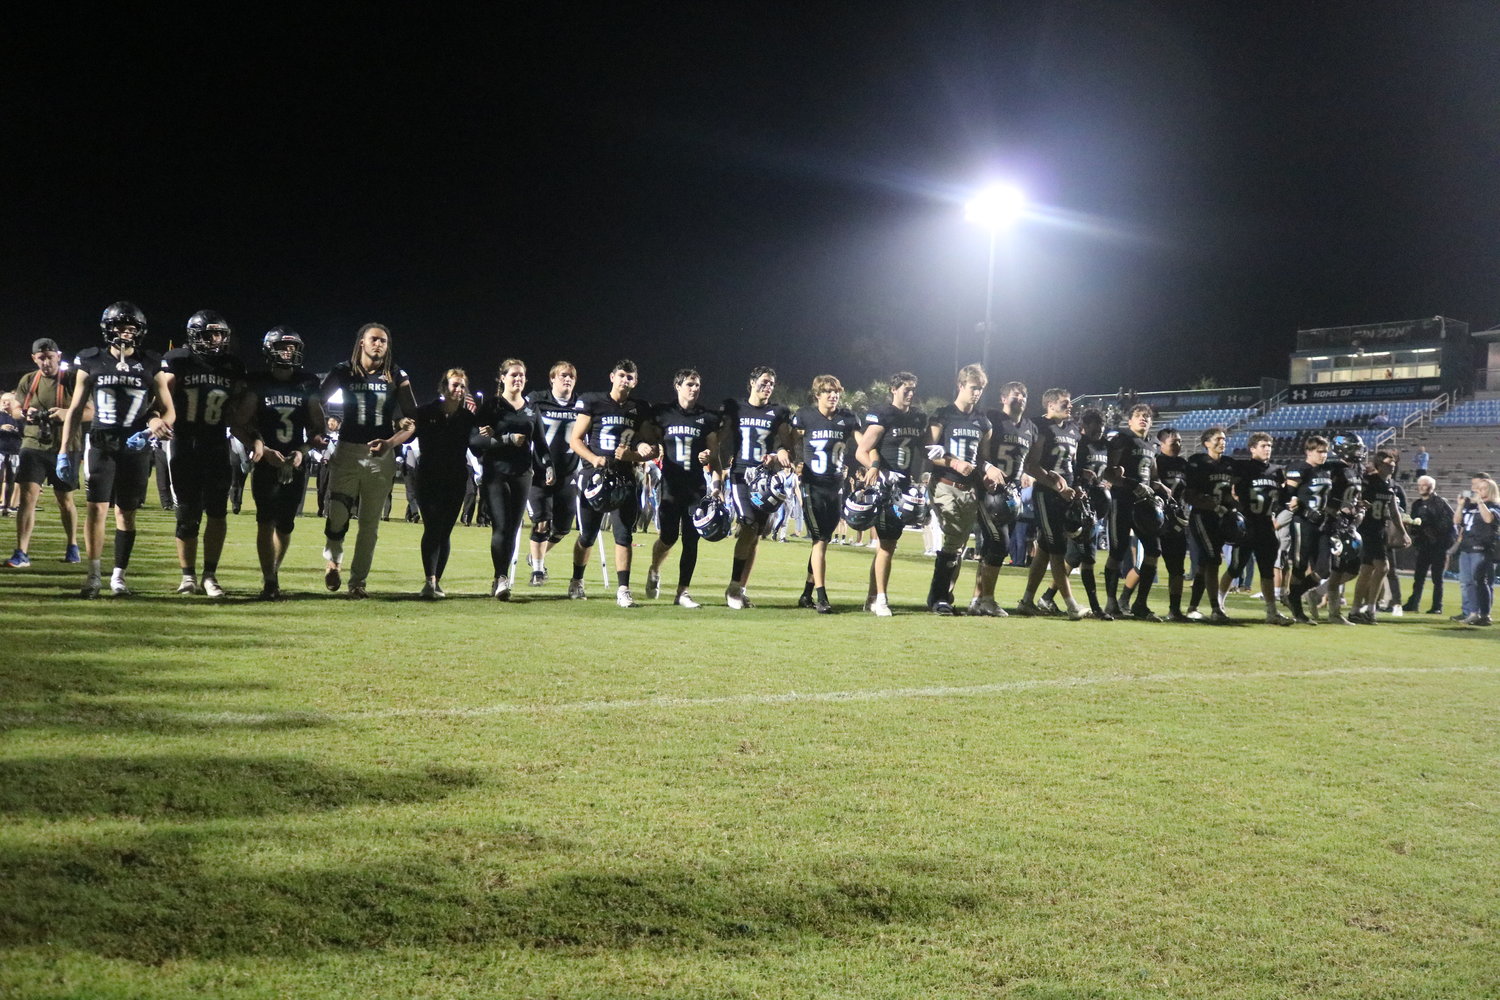 Seniors on the Ponte Vedra football team walk down the field between friends and family for the last time following the team’s senior night contest against Creekside Nov. 4.